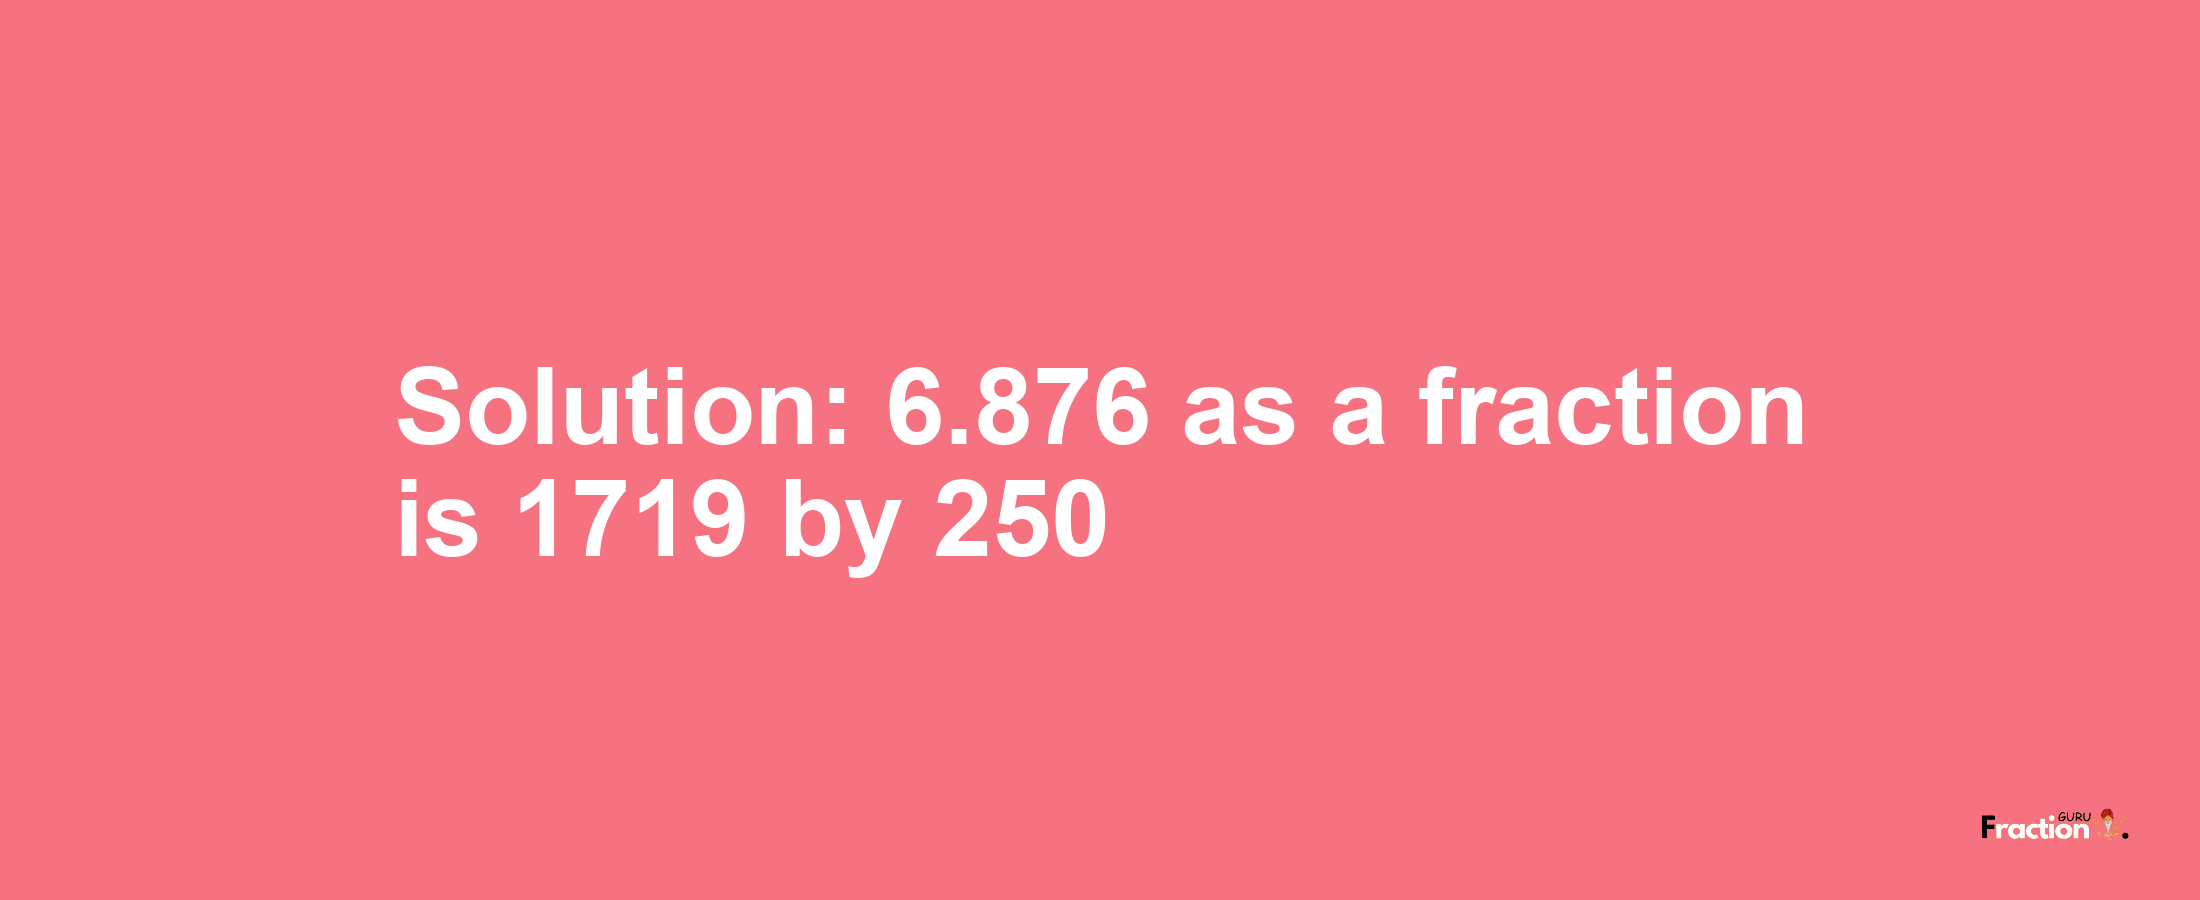 Solution:6.876 as a fraction is 1719/250